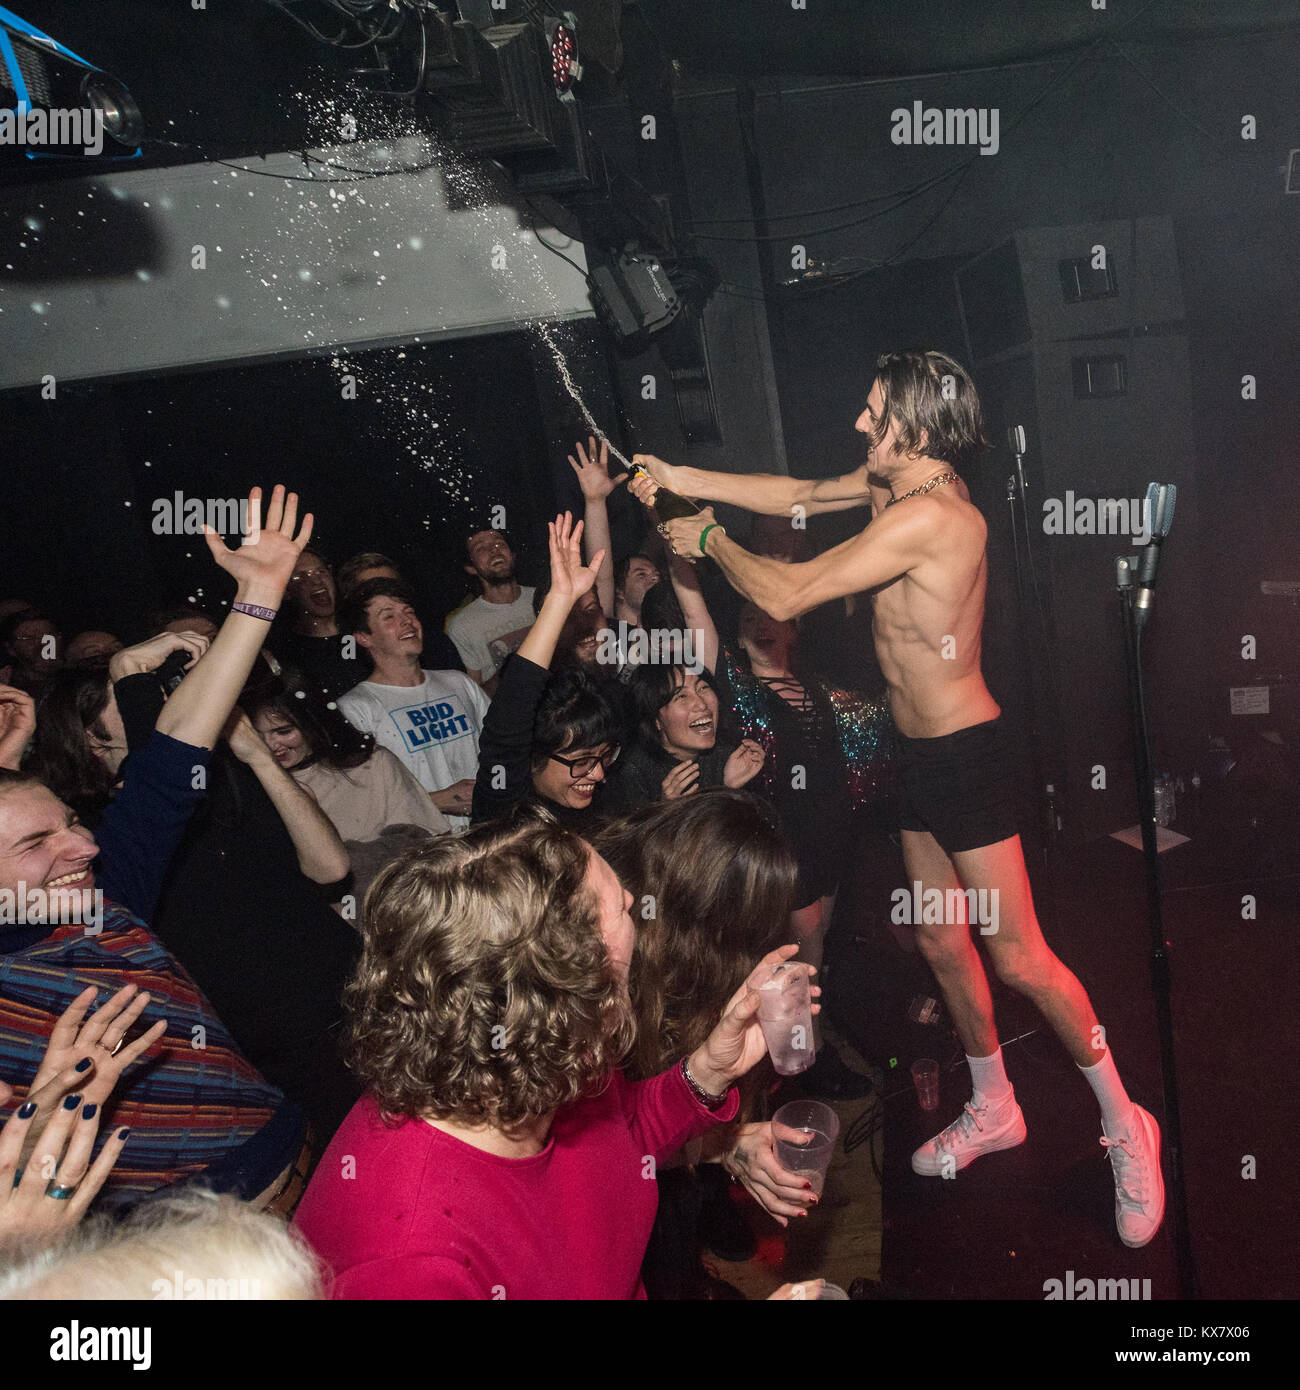 Confidence Man performs in Birmingham as part of their Ring a Ding Tour 2017  Featuring: Confidence Man, Janet Planet, Sugar Bones Where: Birmingham, North east Lincolnshire, United Kingdom When: 08 Dec 2017 Credit: WENN.com Stock Photo